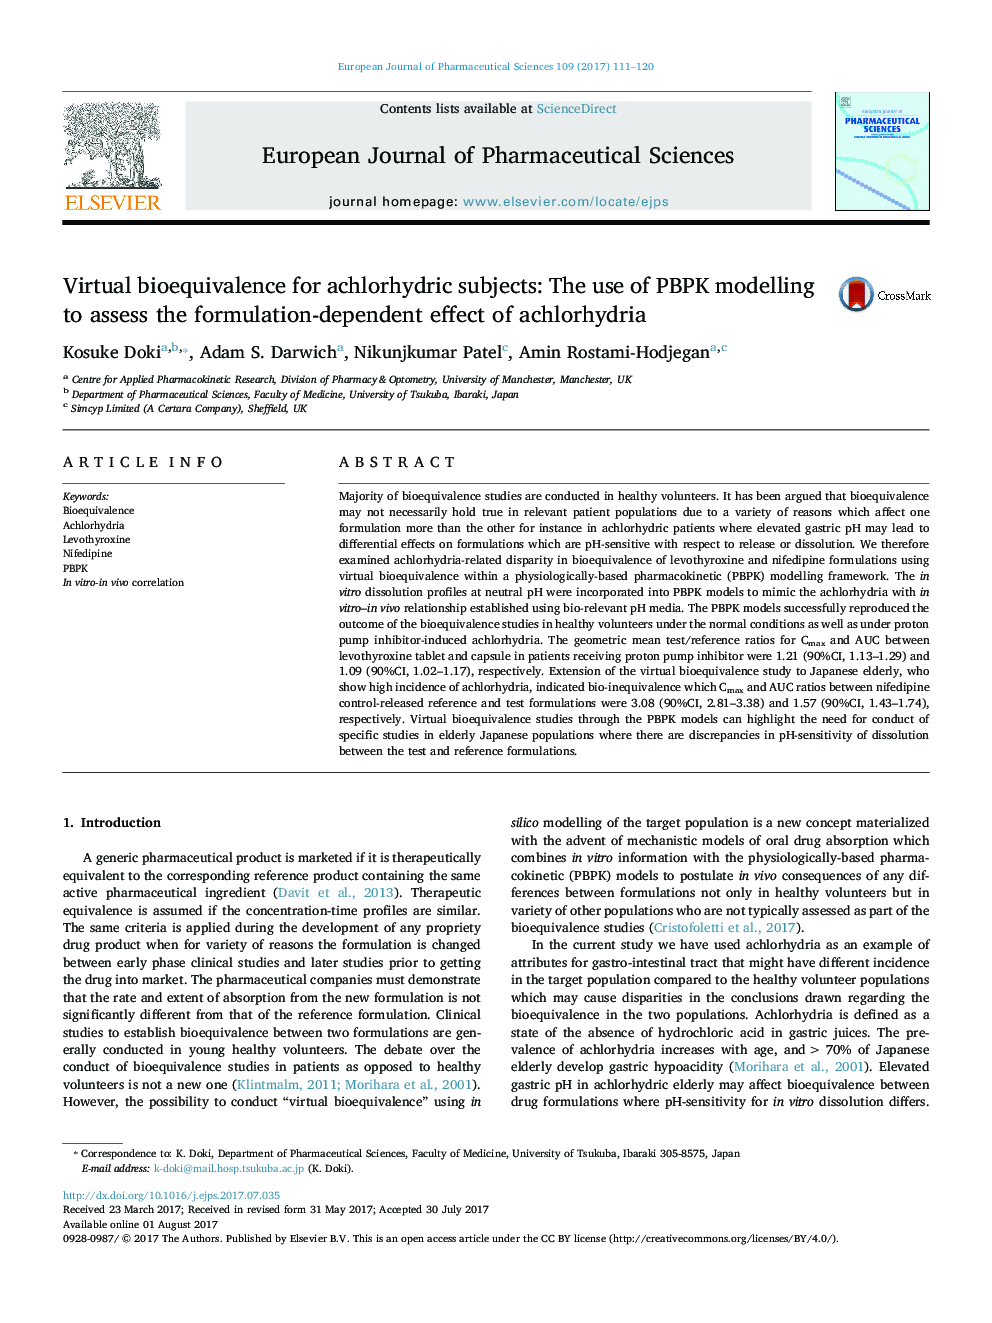 Virtual bioequivalence for achlorhydric subjects: The use of PBPK modelling to assess the formulation-dependent effect of achlorhydria